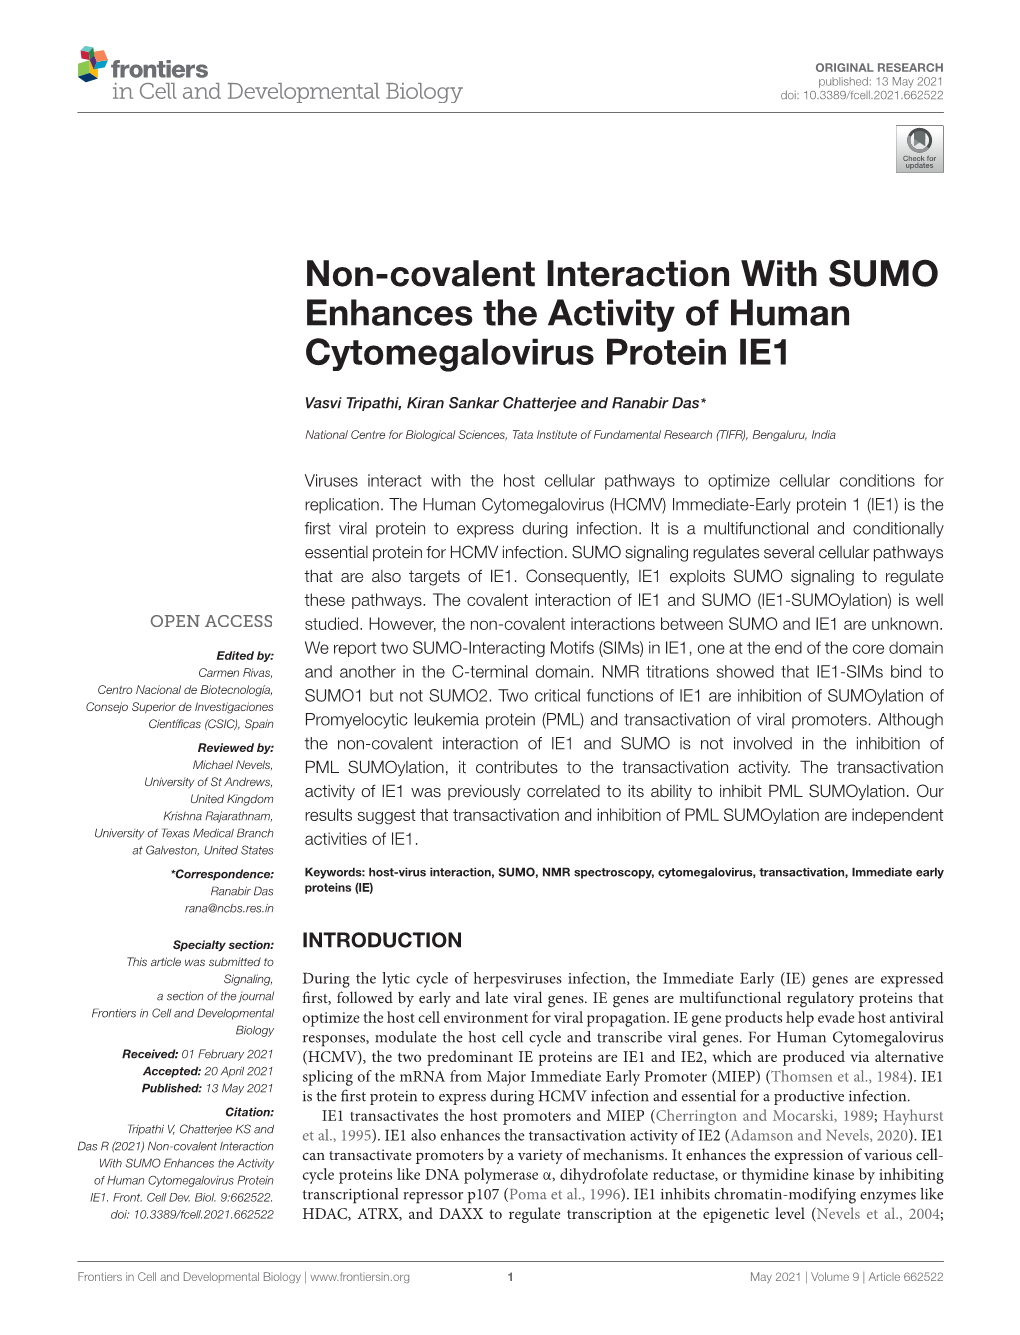 Non-Covalent Interaction with SUMO Enhances the Activity of Human Cytomegalovirus Protein IE1